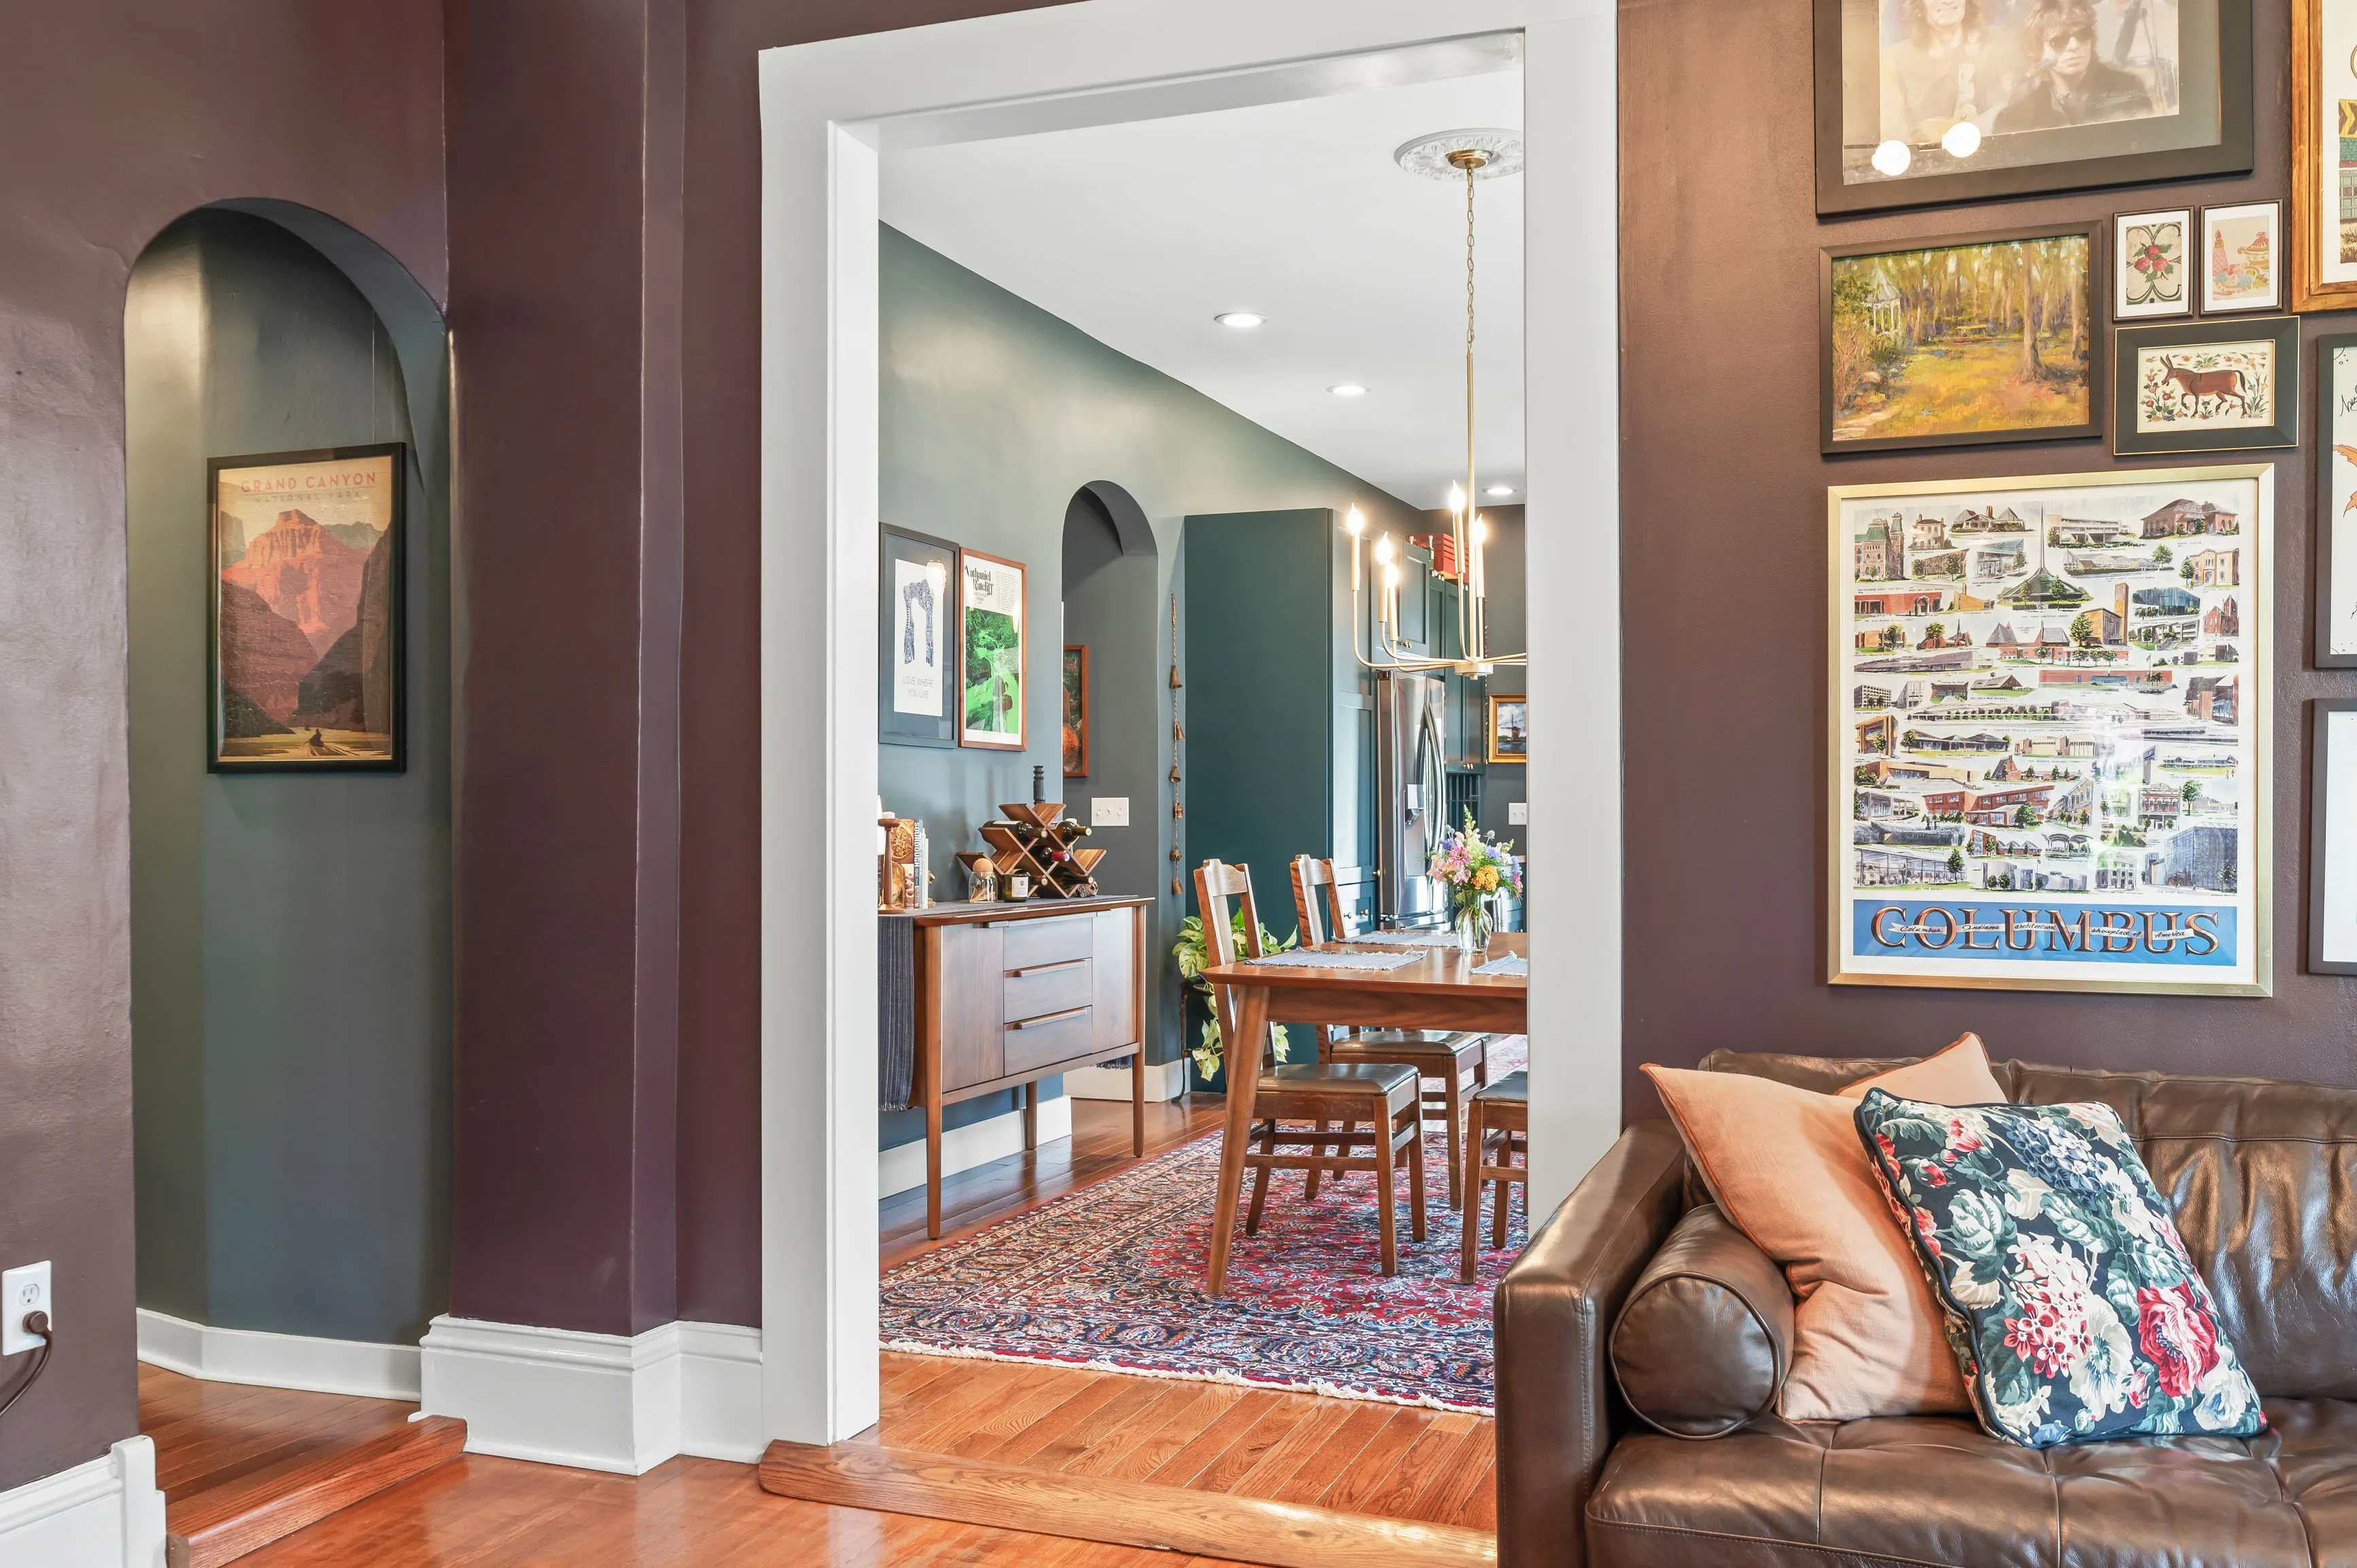 Elegant interior view of a home with hardwood floors, featuring a hallway leading to a dining area with framed pictures on the wall and decorative elements.